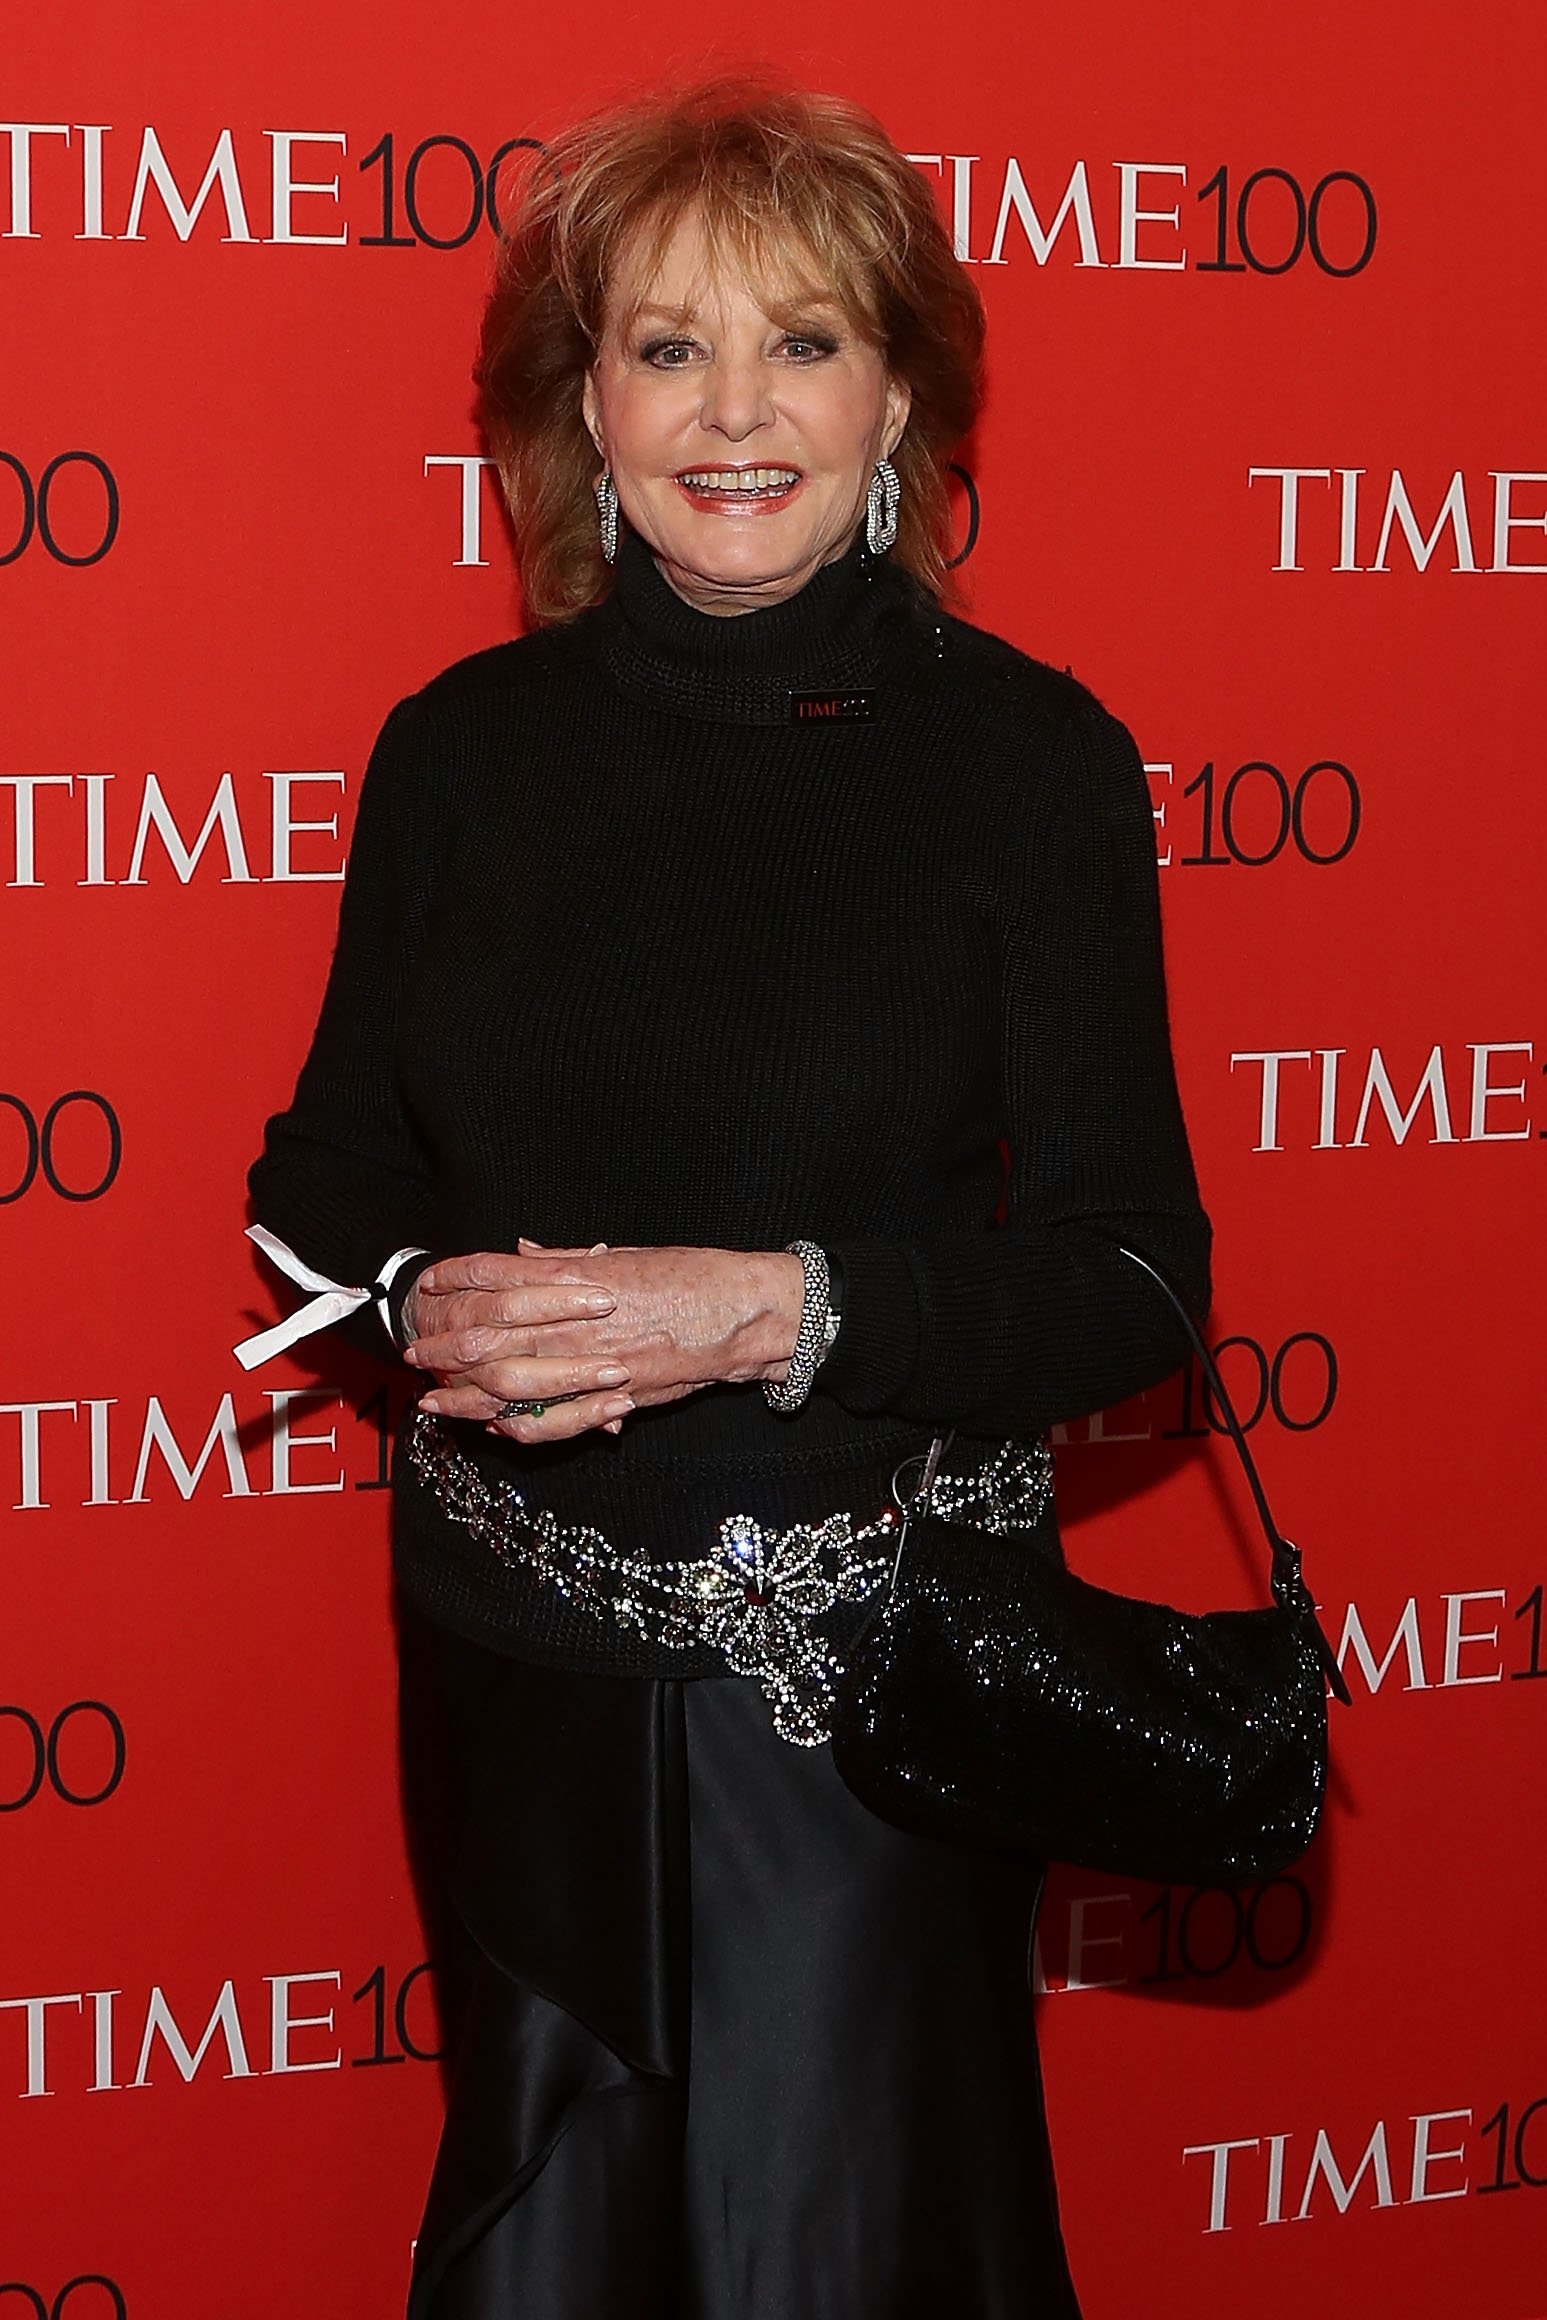 Barbara Walters attends TIME 100 Gala, TIME's 100 Most Influential People In The World at Frederick P. Rose Hall, Jazz at Lincoln Center on April 21, 2015 in New York City | Source: Getty Images